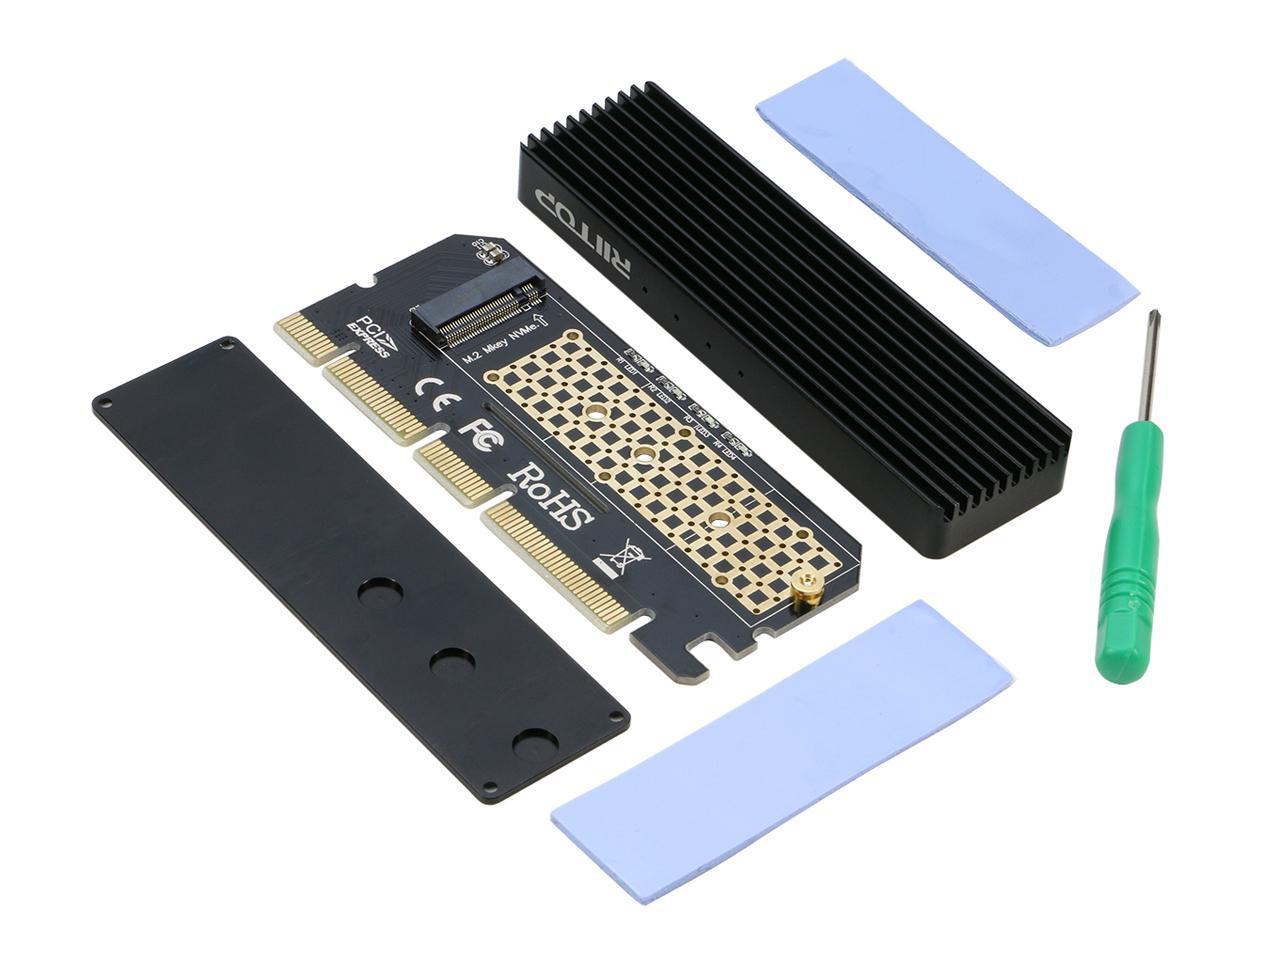 Riitop Nvme Adapter M2 Pcie Ssd To Pci E X4x8x16 Converter Card With Heat Sink For M2 M Key 9316